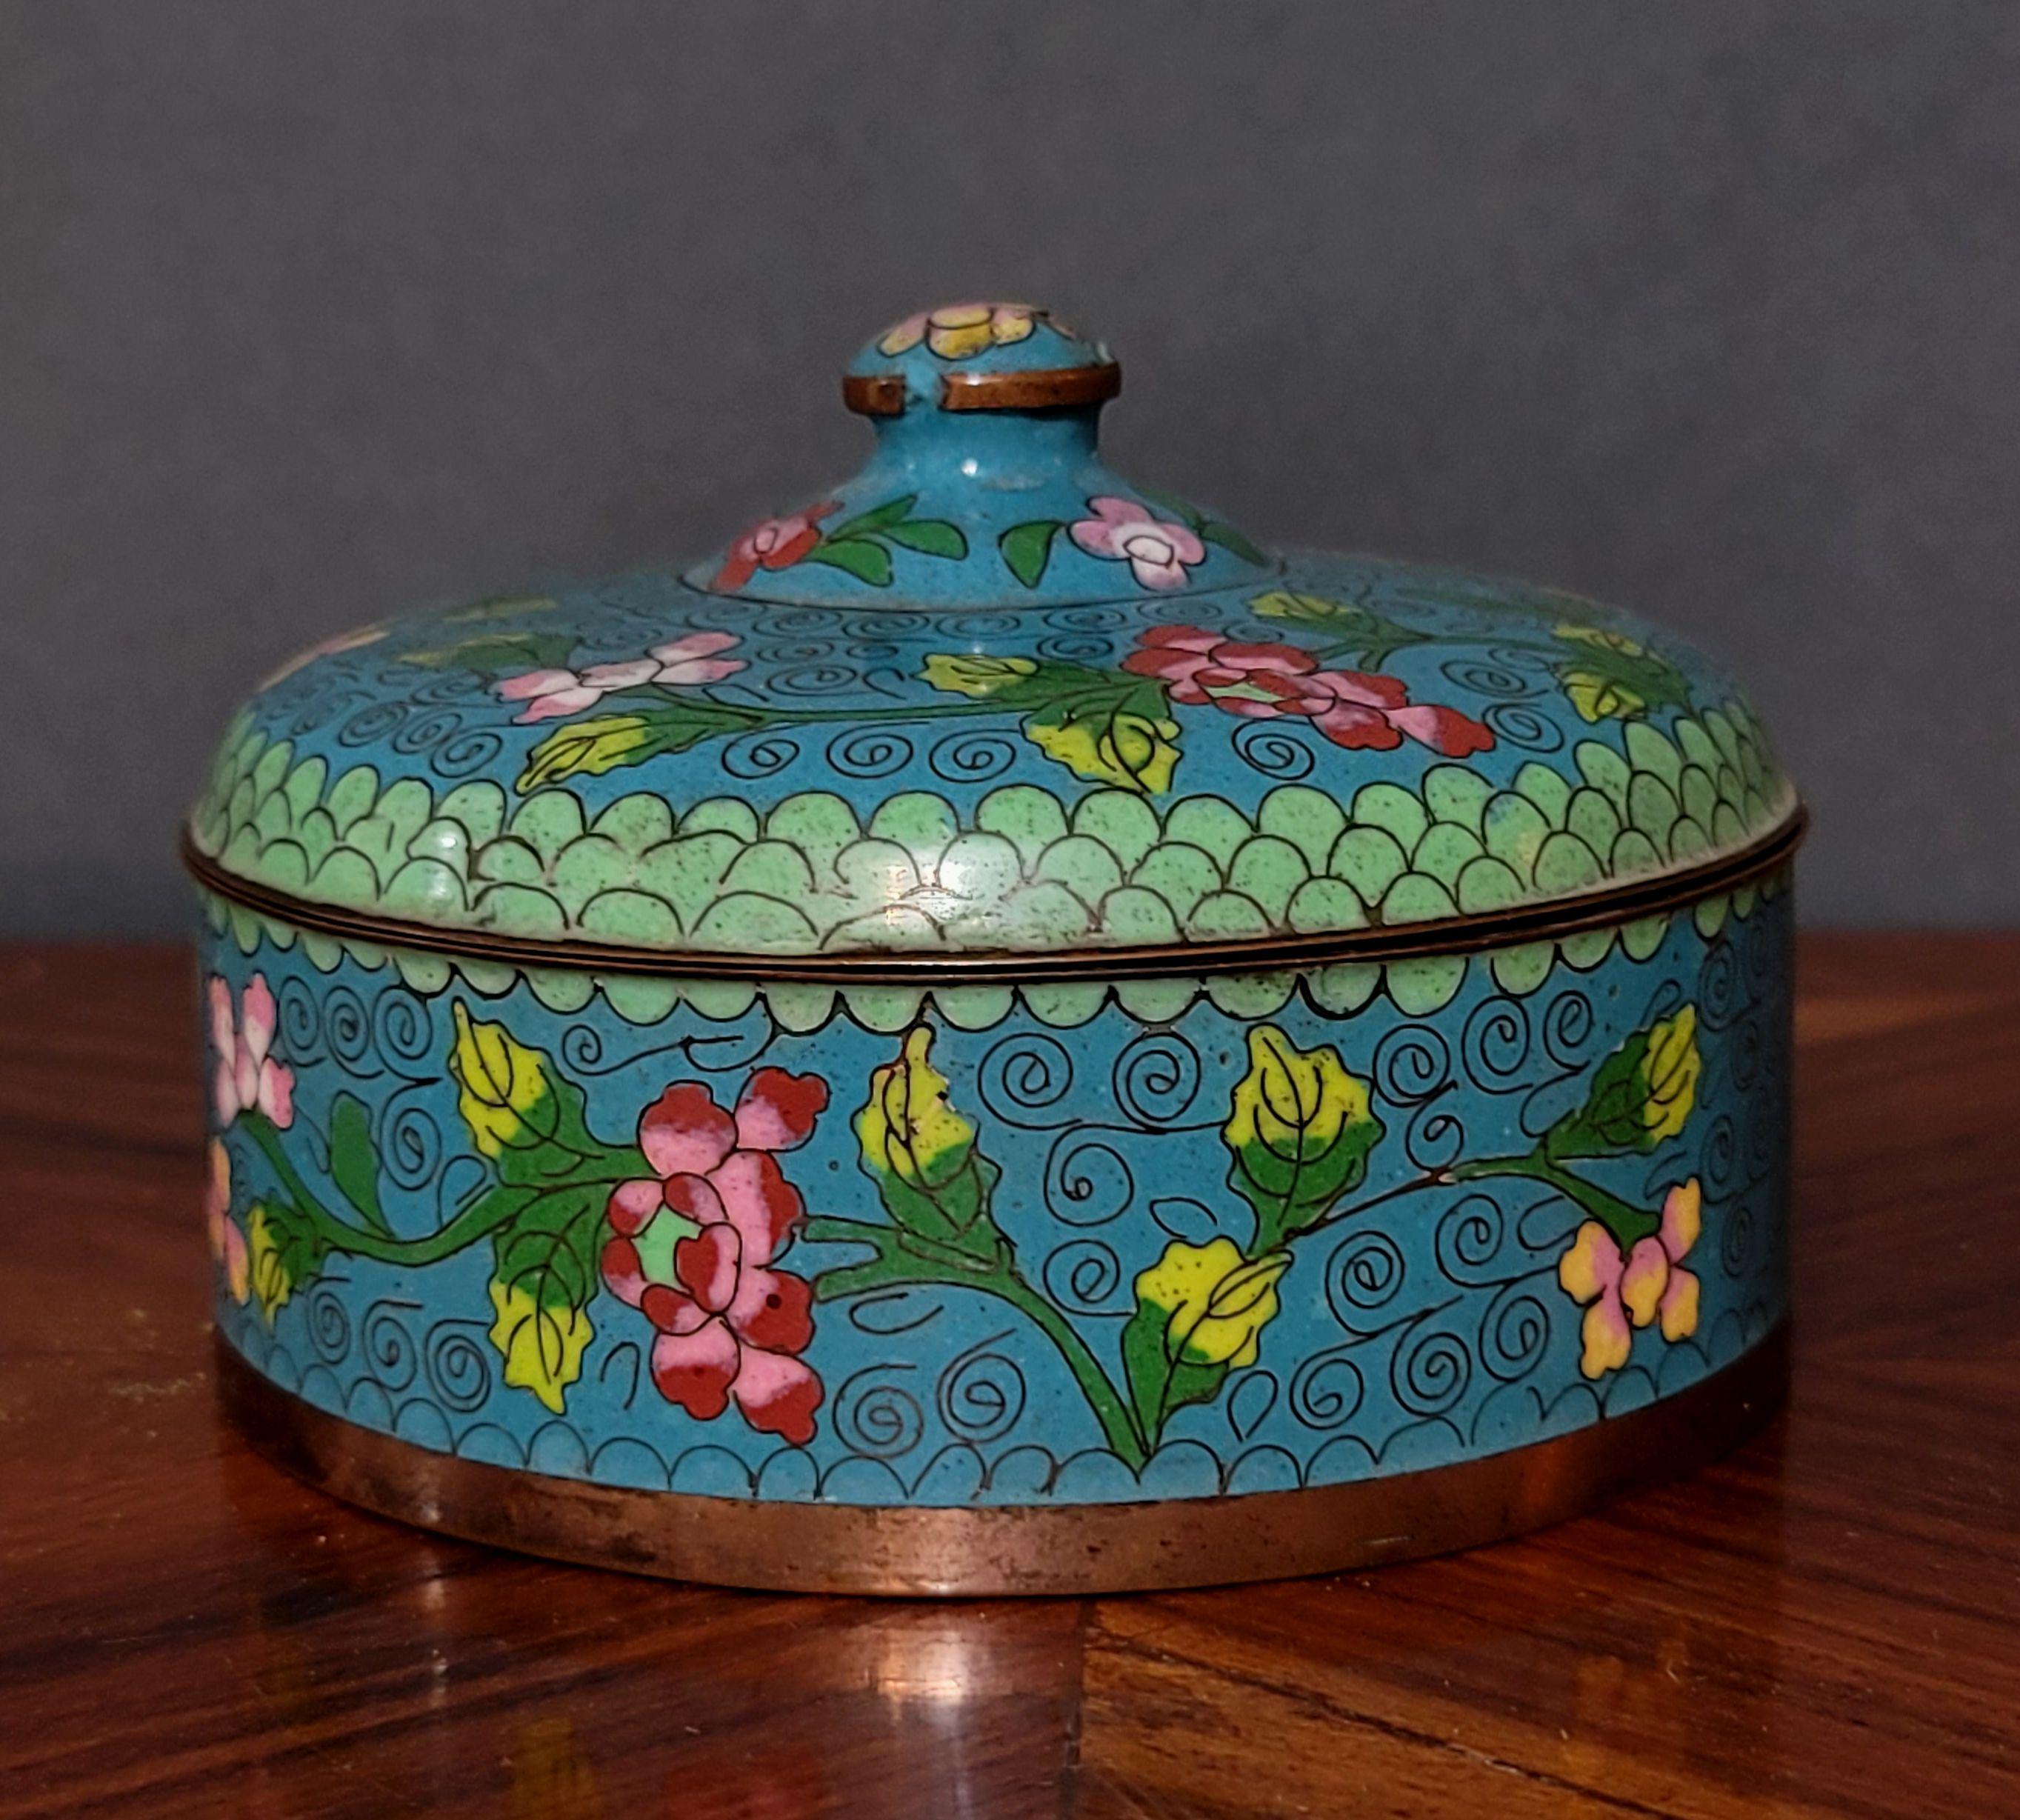 Antique Chinese cloisonné enamel round box with lid depicting pink and red flowers, green and yellow leaves, 19th century
Ashtray : 3.5